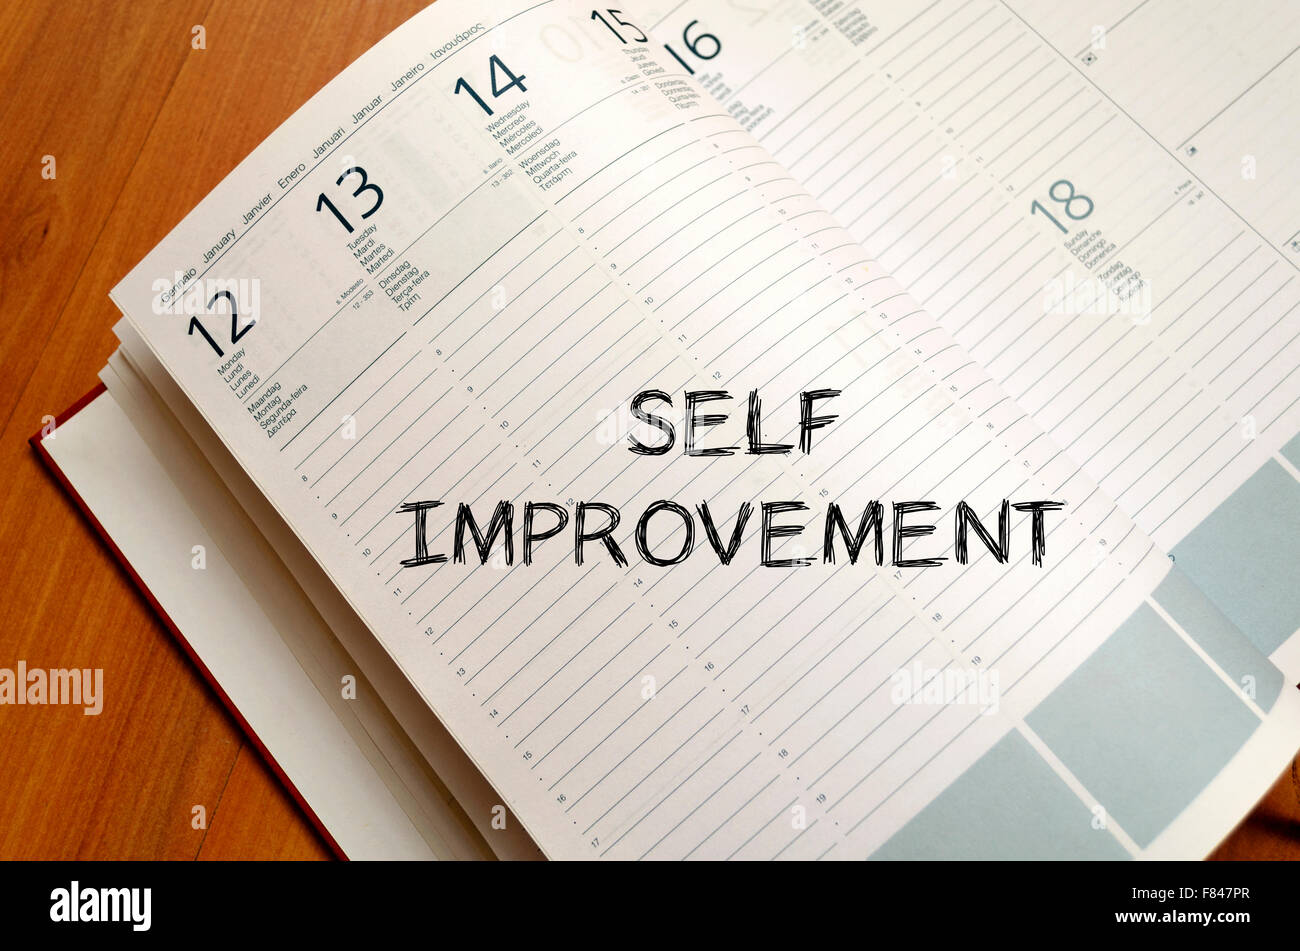 Self improvement text concept write on notebook with pen Stock Photo